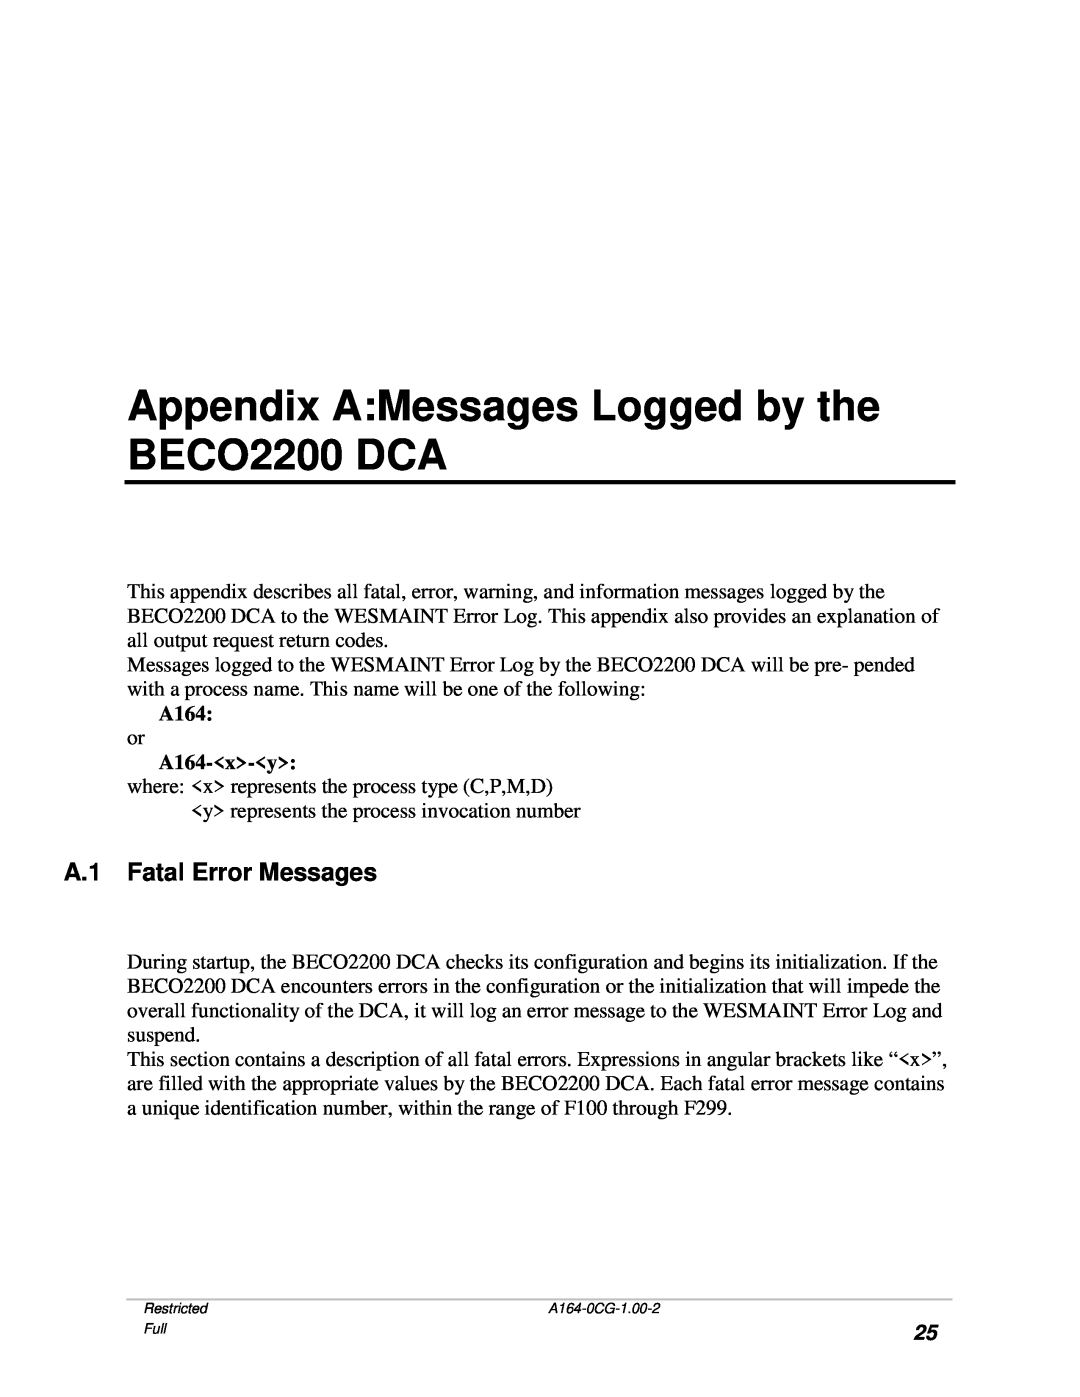 GE BECCO2200 manual Appendix AMessages Logged by the BECO2200 DCA, A.1 Fatal Error Messages, A164-x-y 